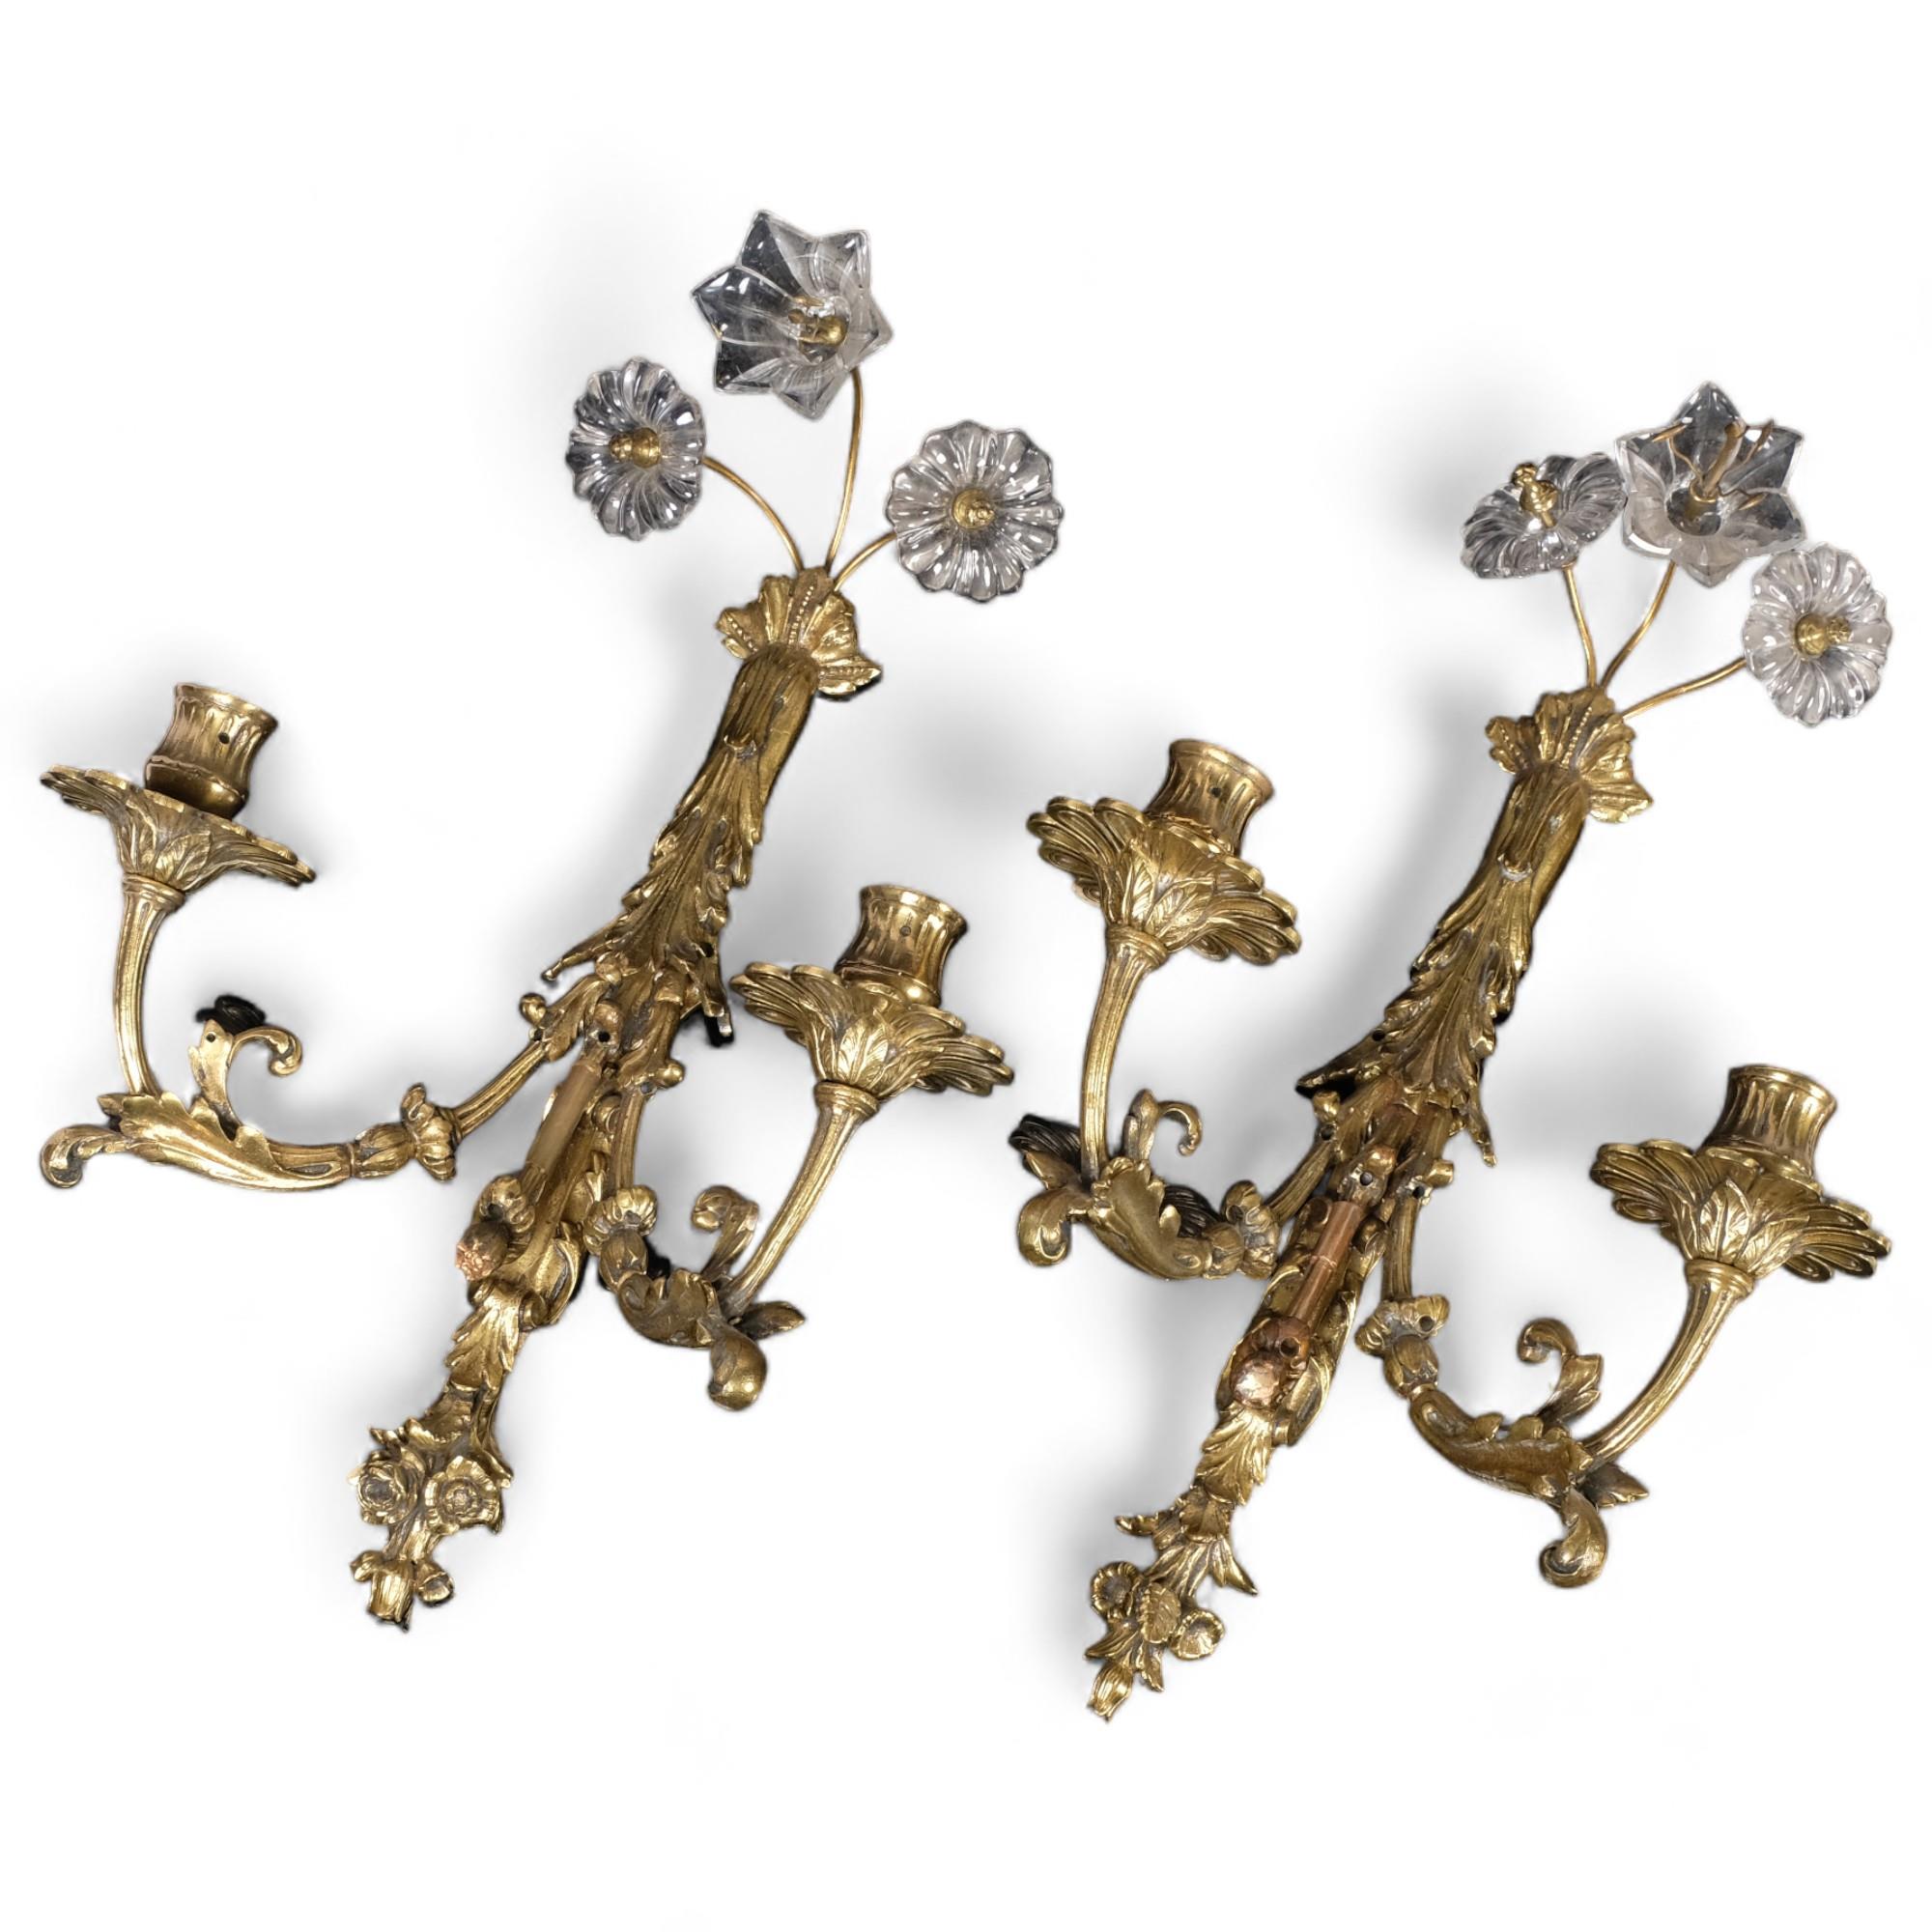 A pair of ornate cast-brass twin wall lights, with glass floral decoration, H45cm